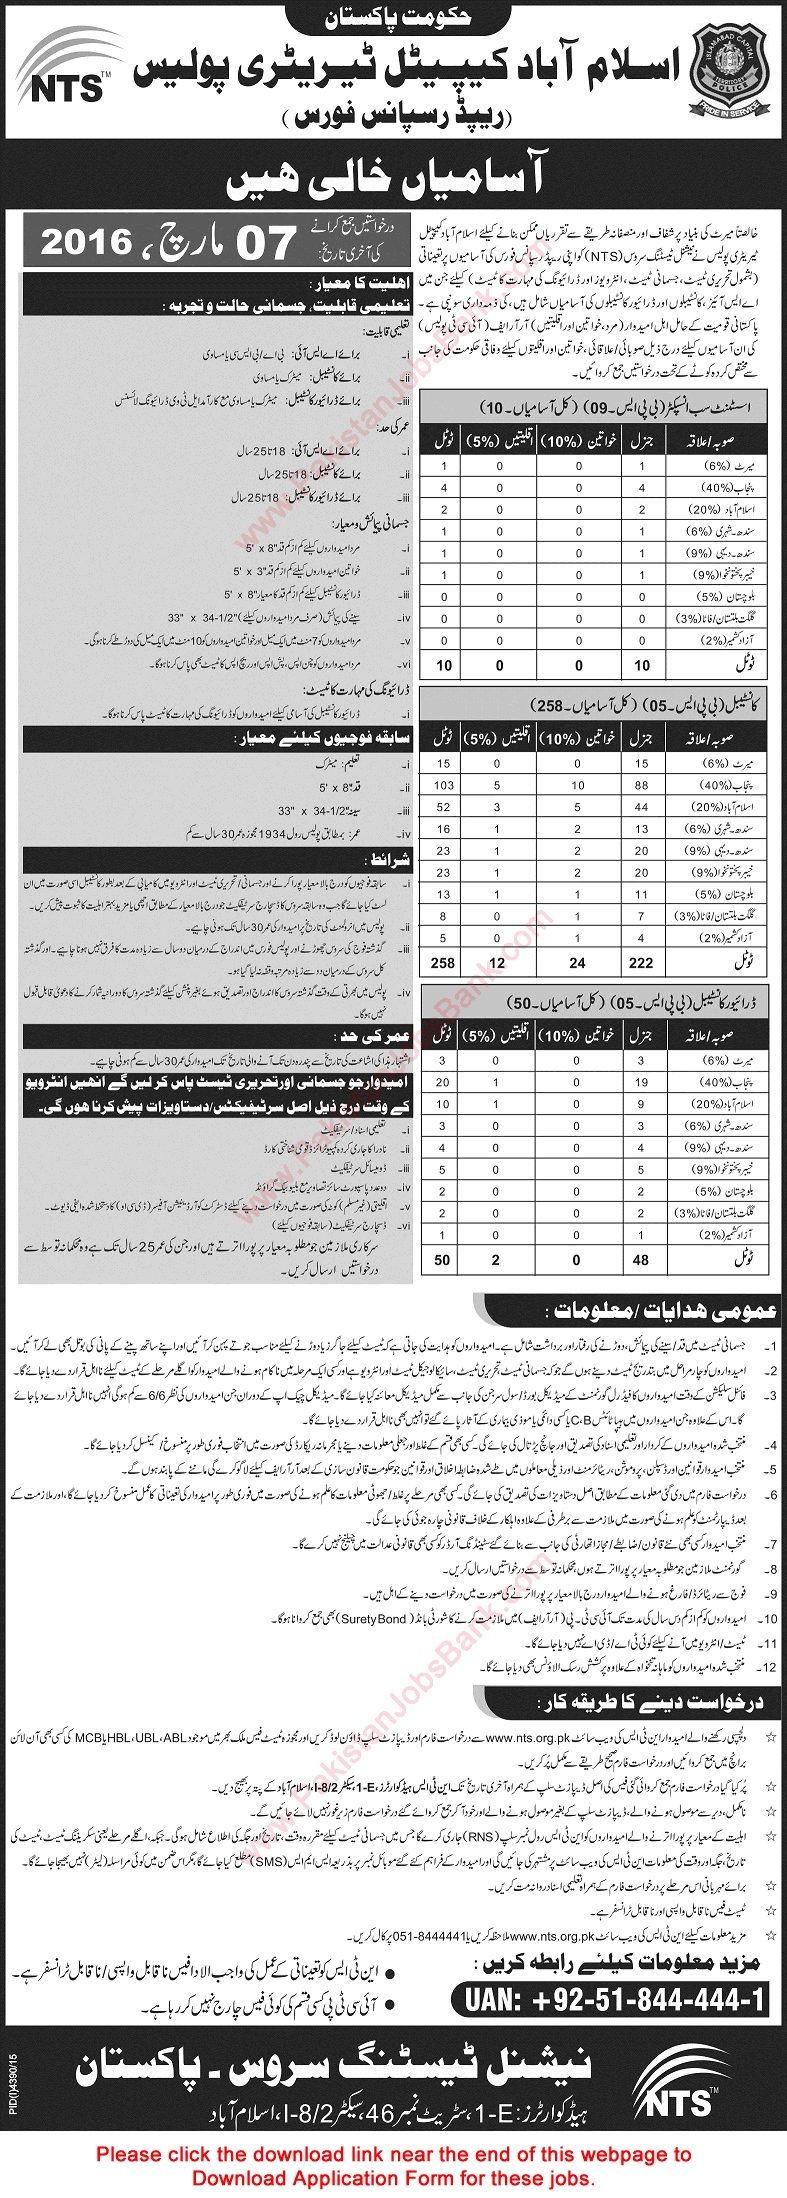 Islamabad Police Jobs February 2016 NTS Constables, Drivers & ASI Rapid Response Force Application Form Latest